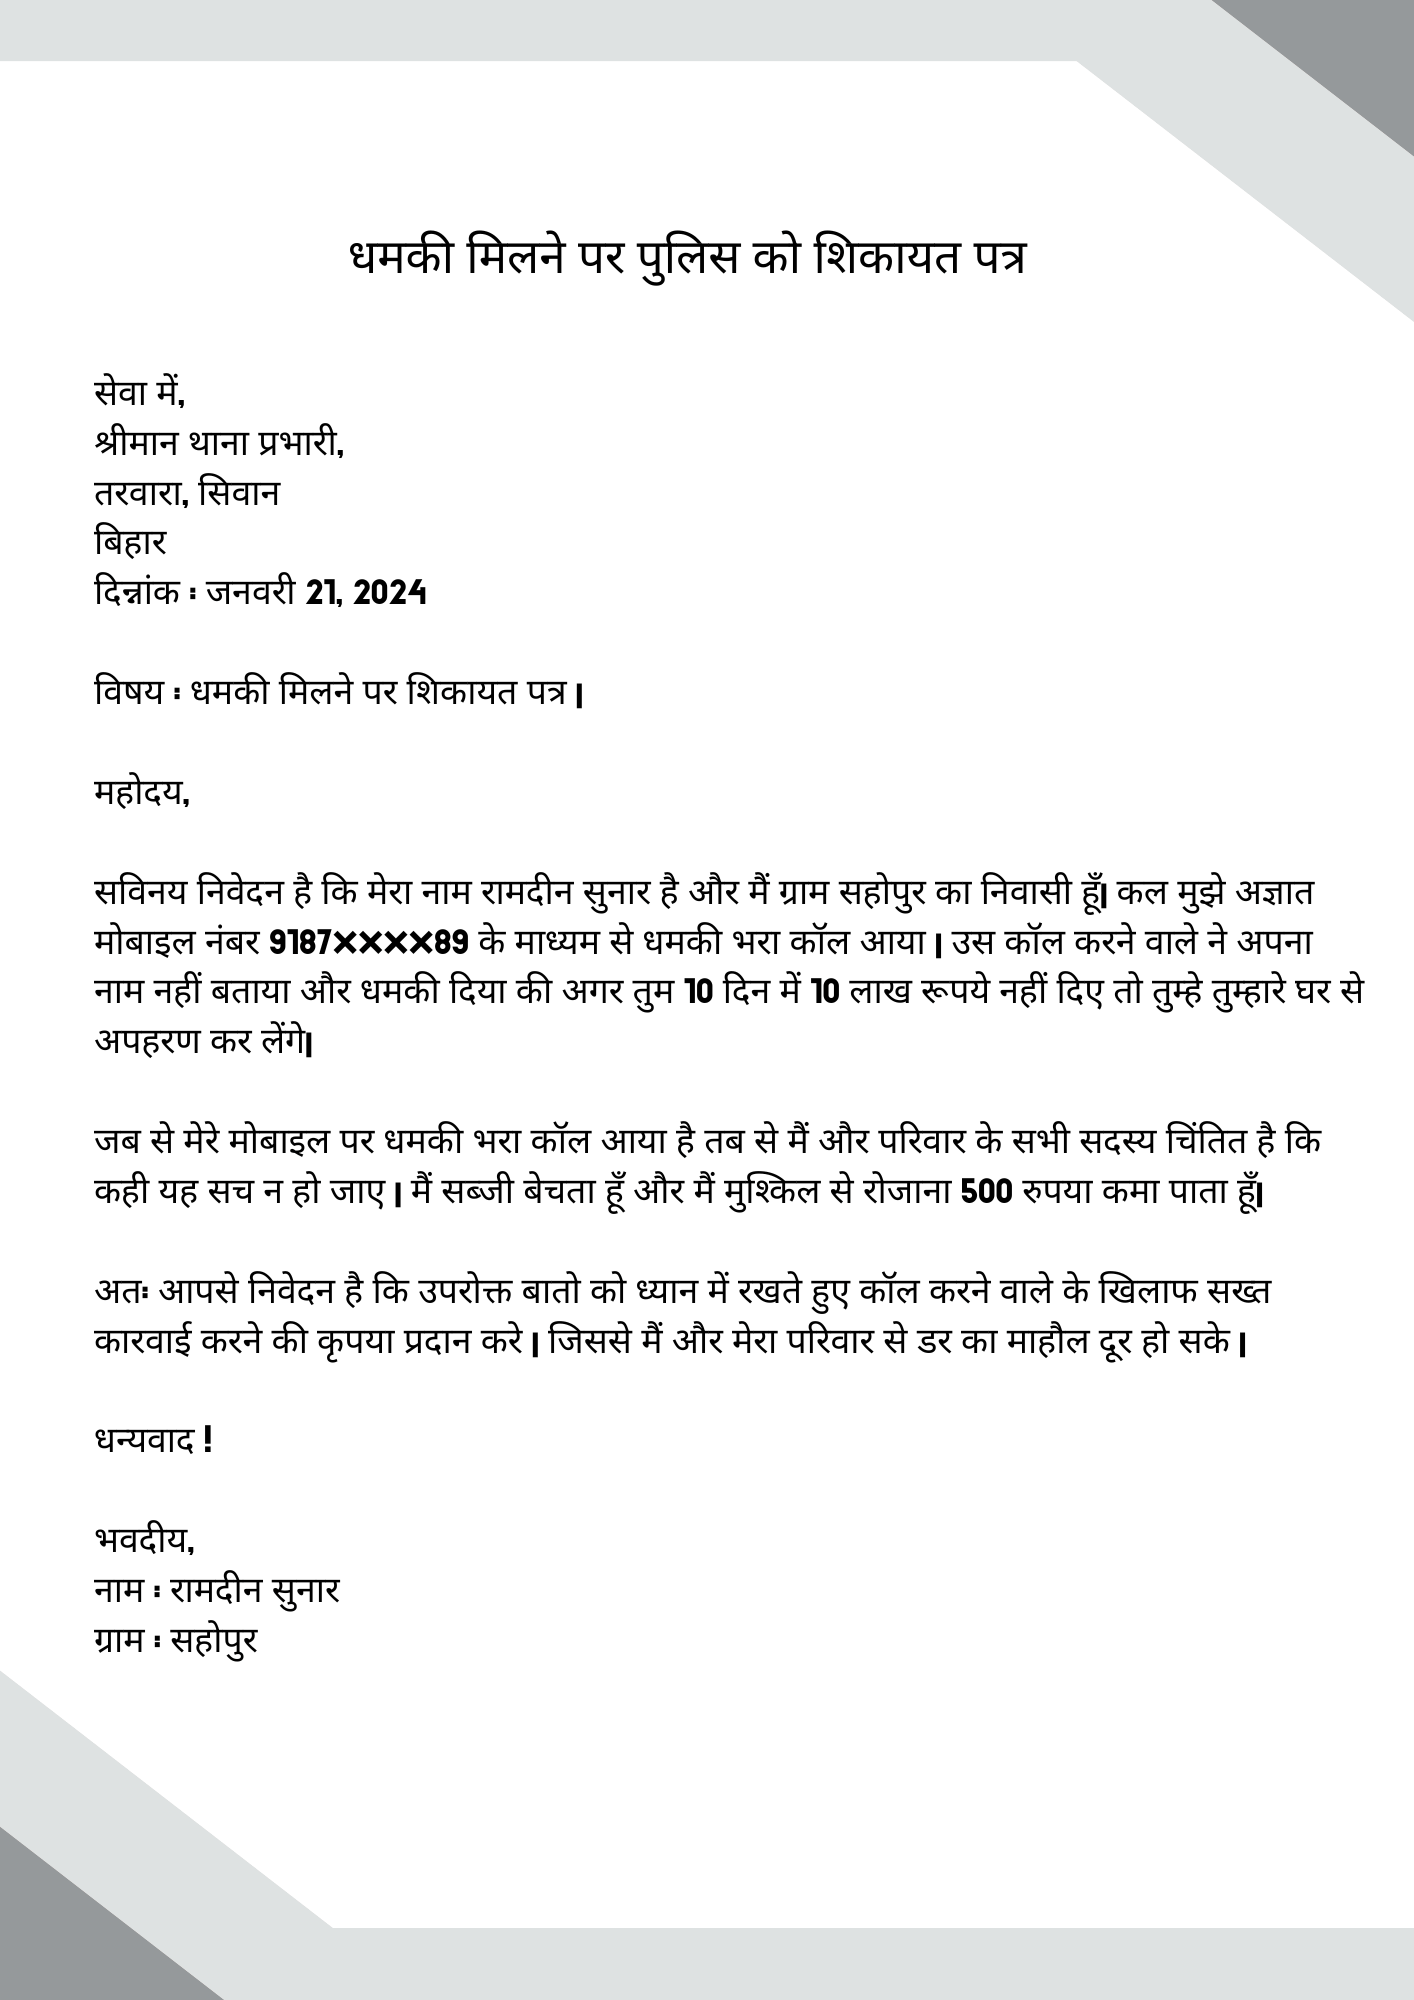 Complaint letter to Police for Threatening in Hindi